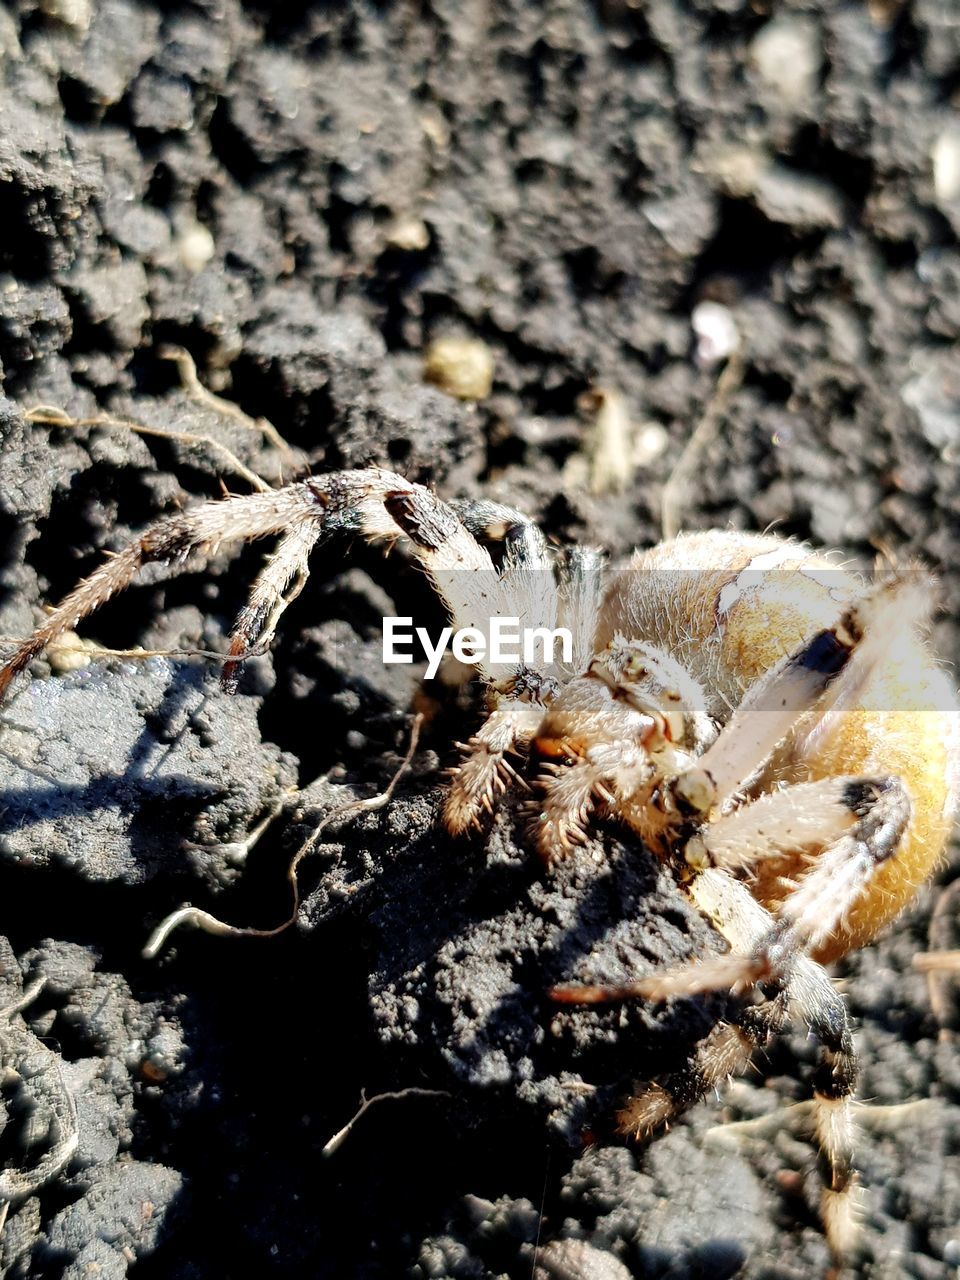 CLOSE-UP OF SPIDER IN THE GROUND